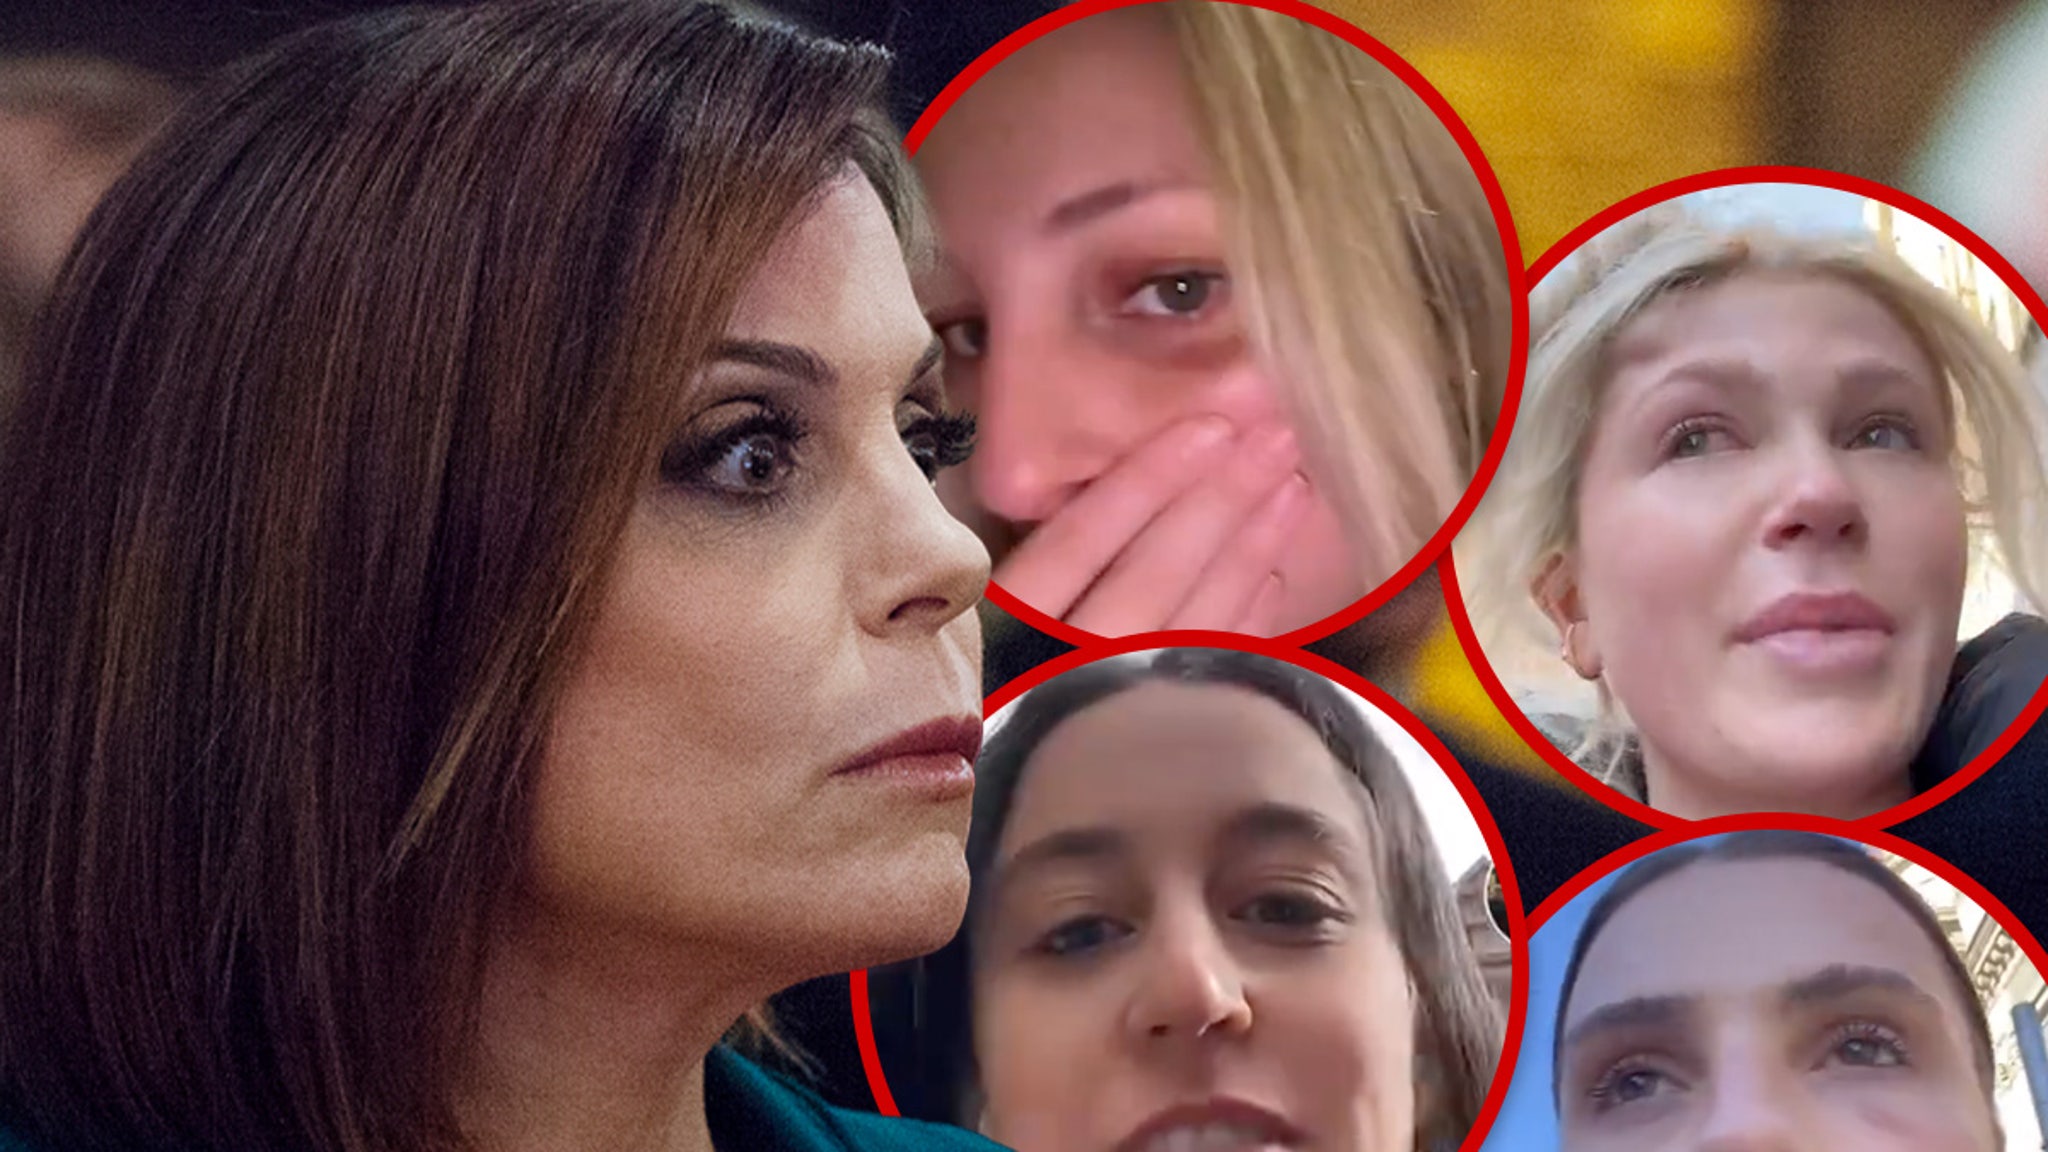 Bethenny Frankel Says She Was Punched by Man in NYC, Part of Larger Trend